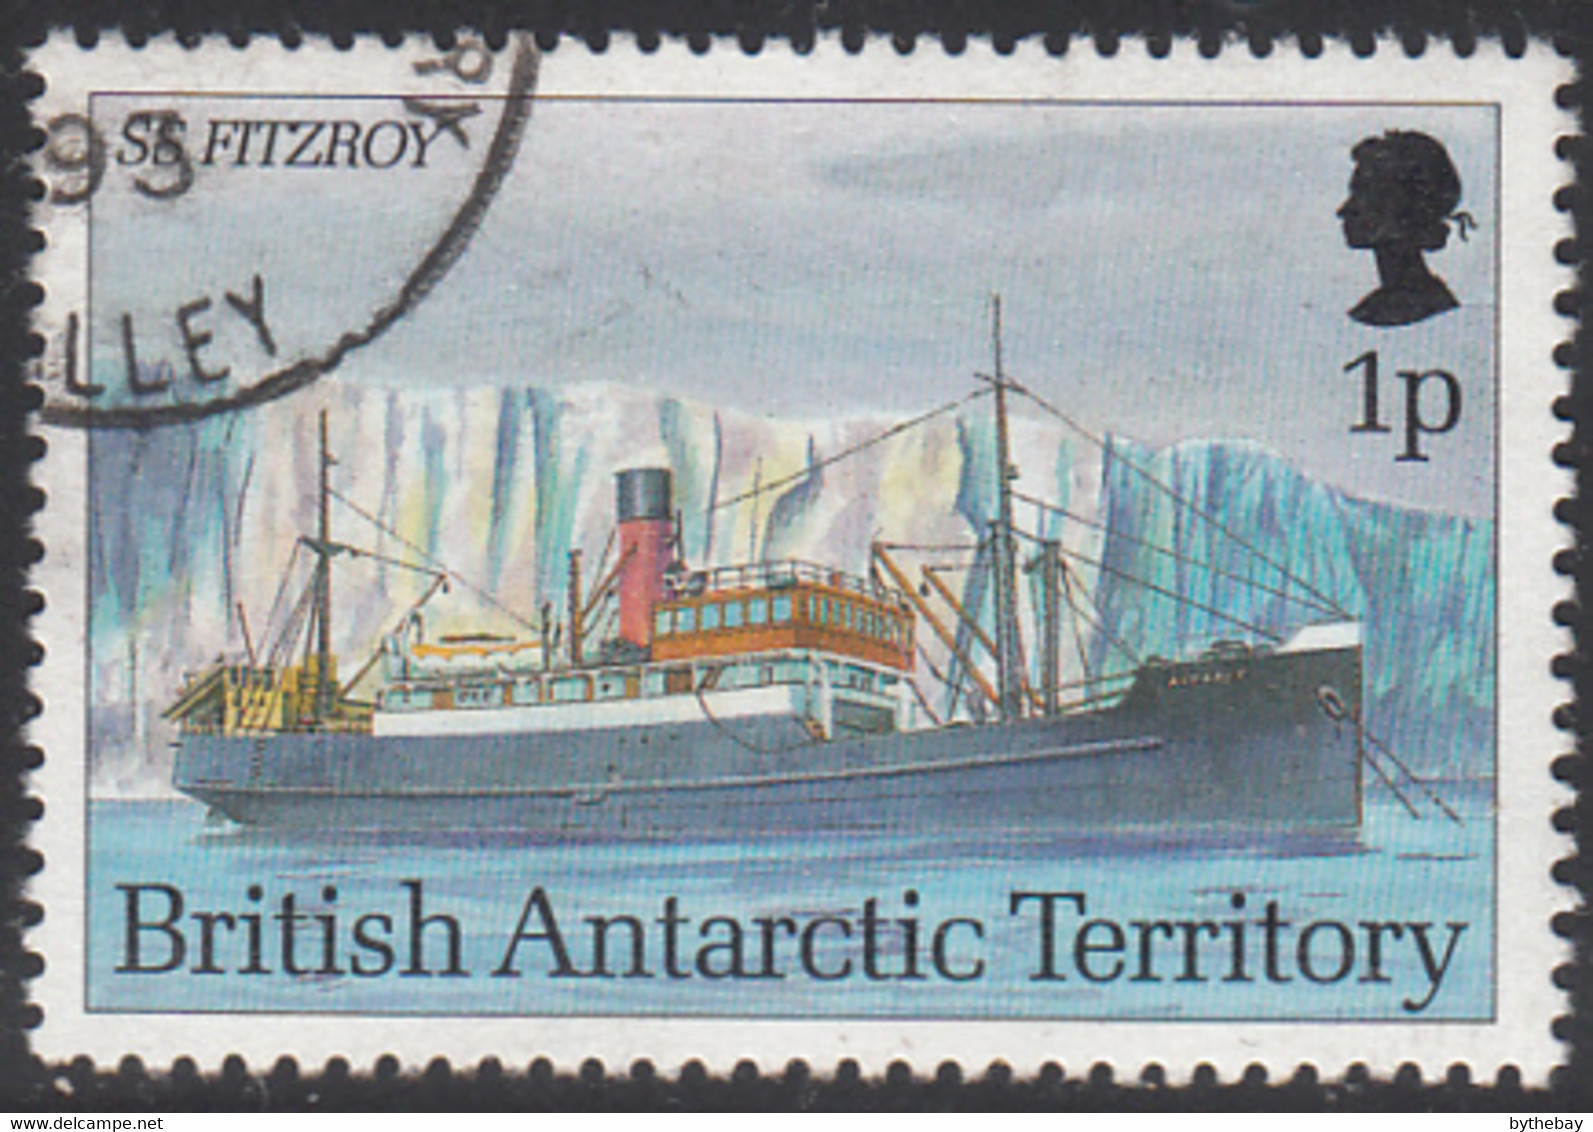 British Antarctic Territory 1993 Used Sc #202 1p SS Fitzroy Research Ships - Gebraucht